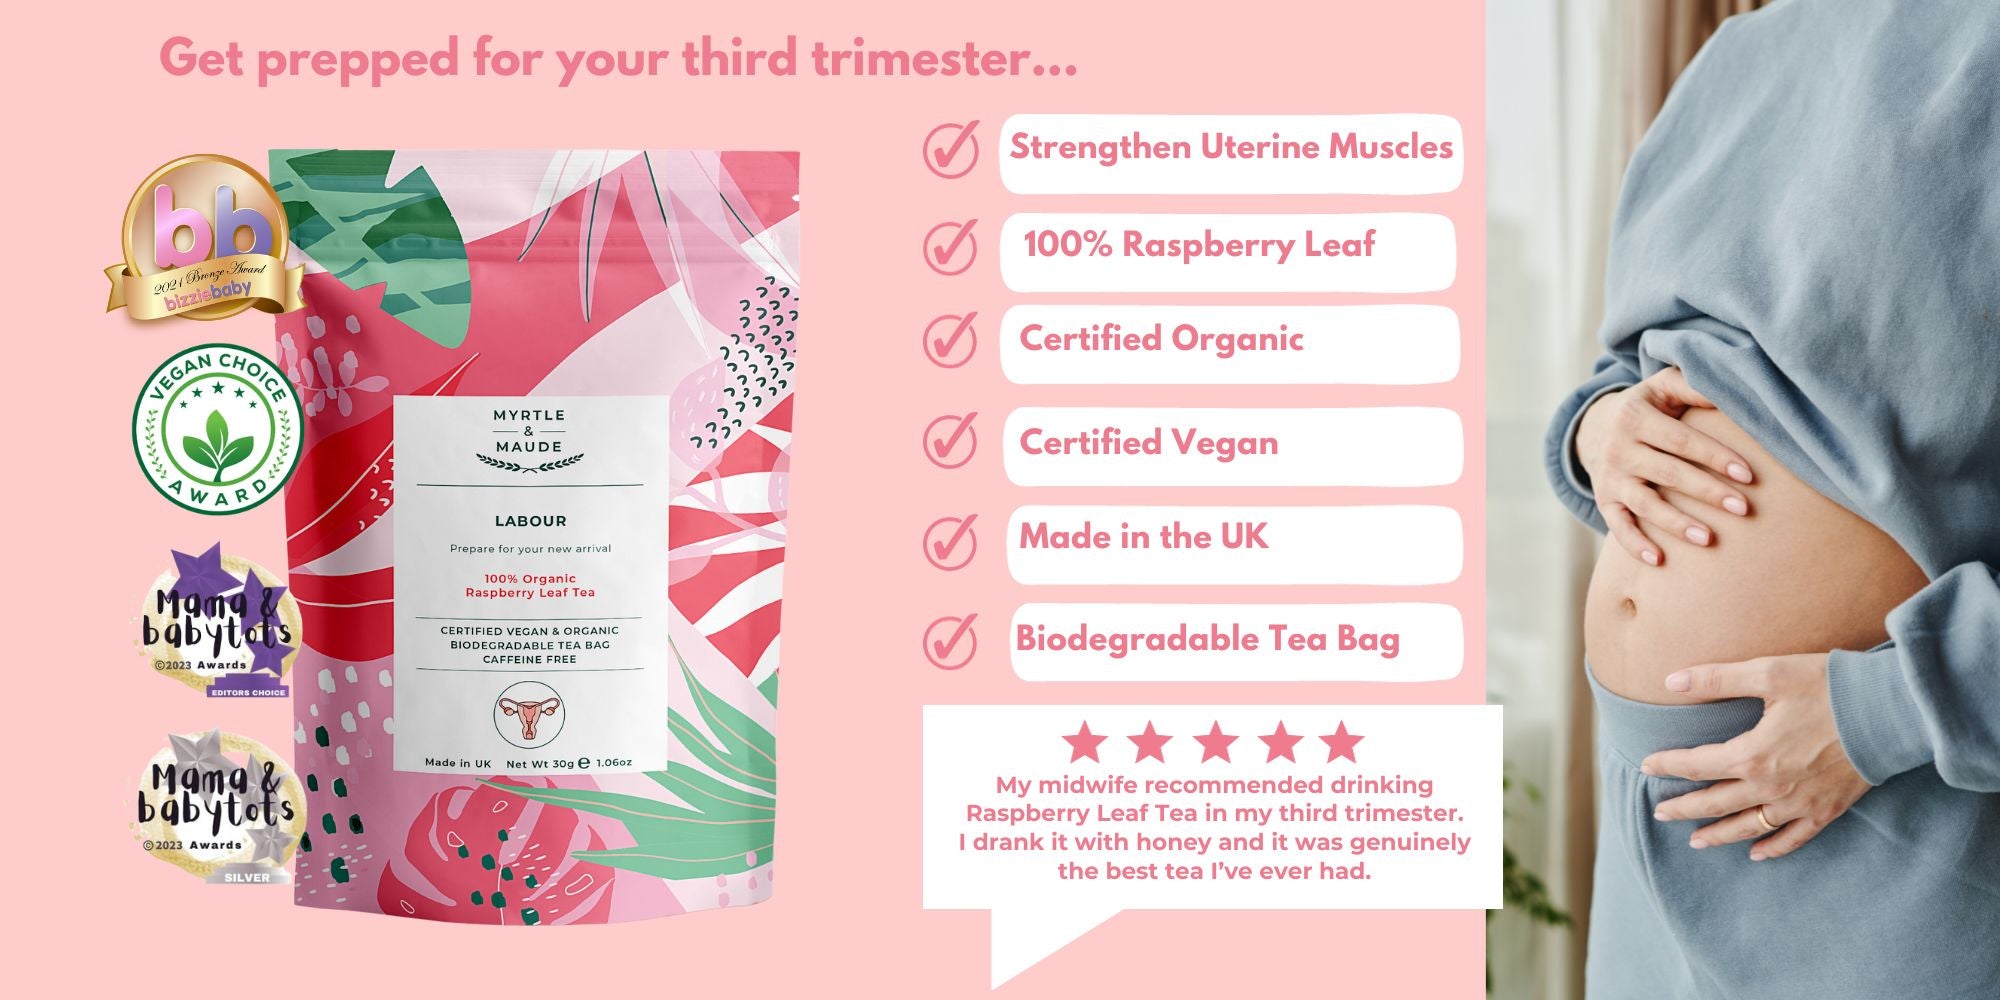 Get prepped for your third trimester